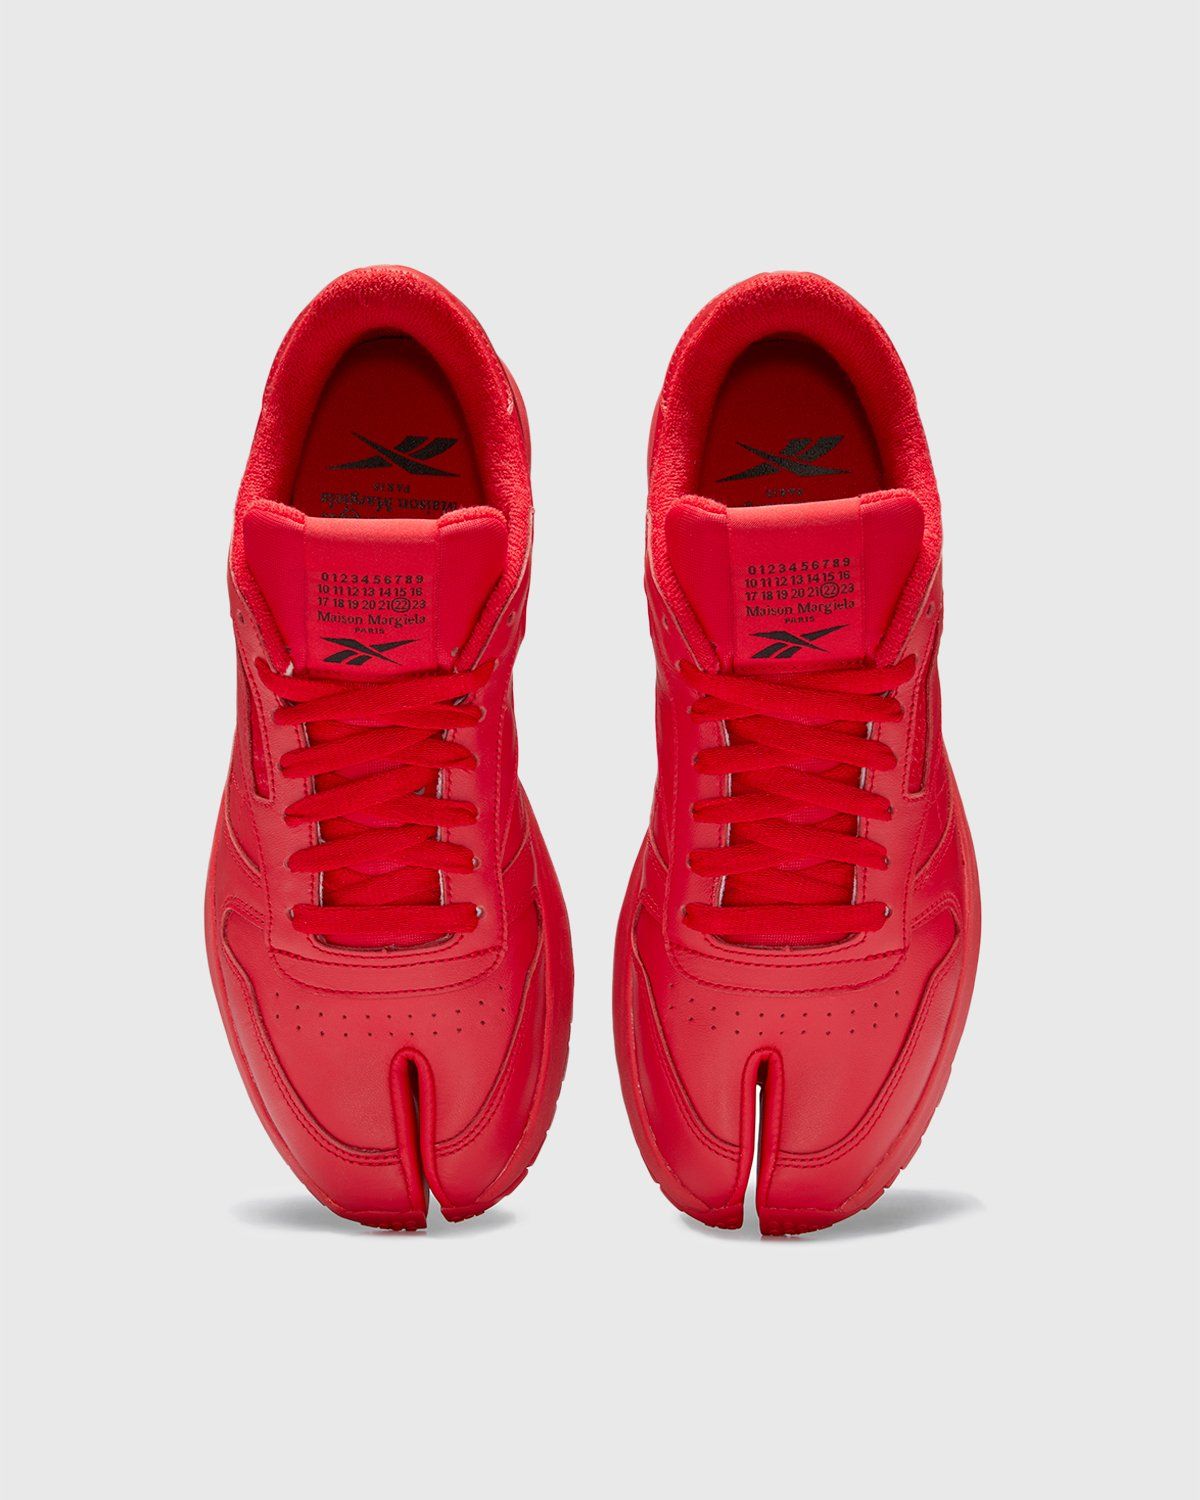 Maison Margiela x Reebok – Classic Leather Tabi Red - Sneakers - Red - Image 4